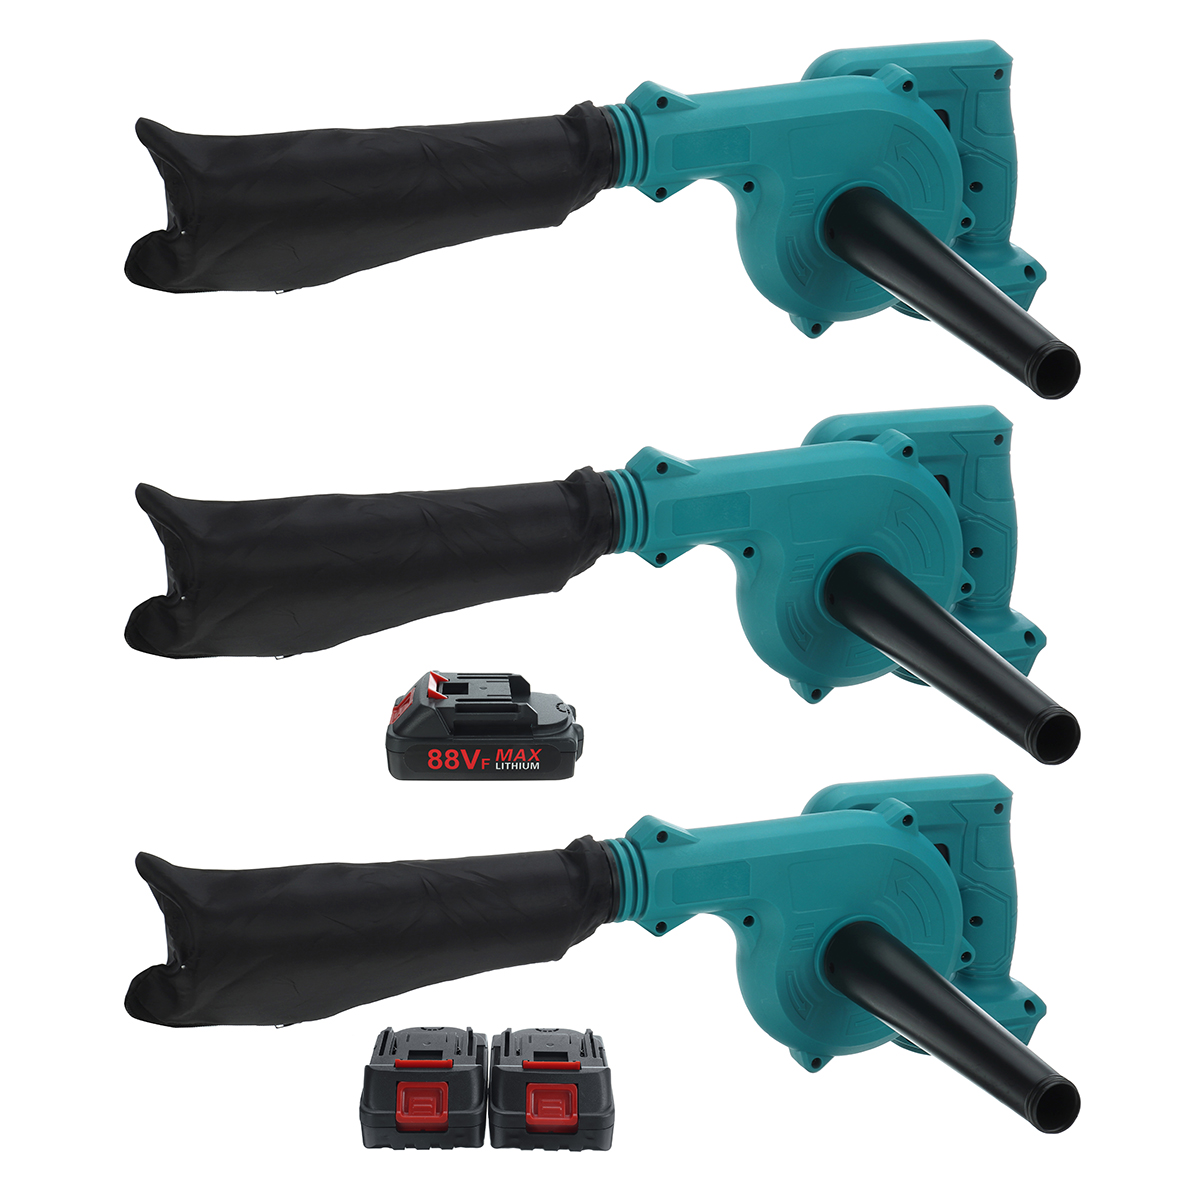 2-IN-1-Cordless-Electric-Air-Blower--Suction-Handheld-Leaf-Computer-Dust-Collector-Cleaner-Power-Too-1851240-11